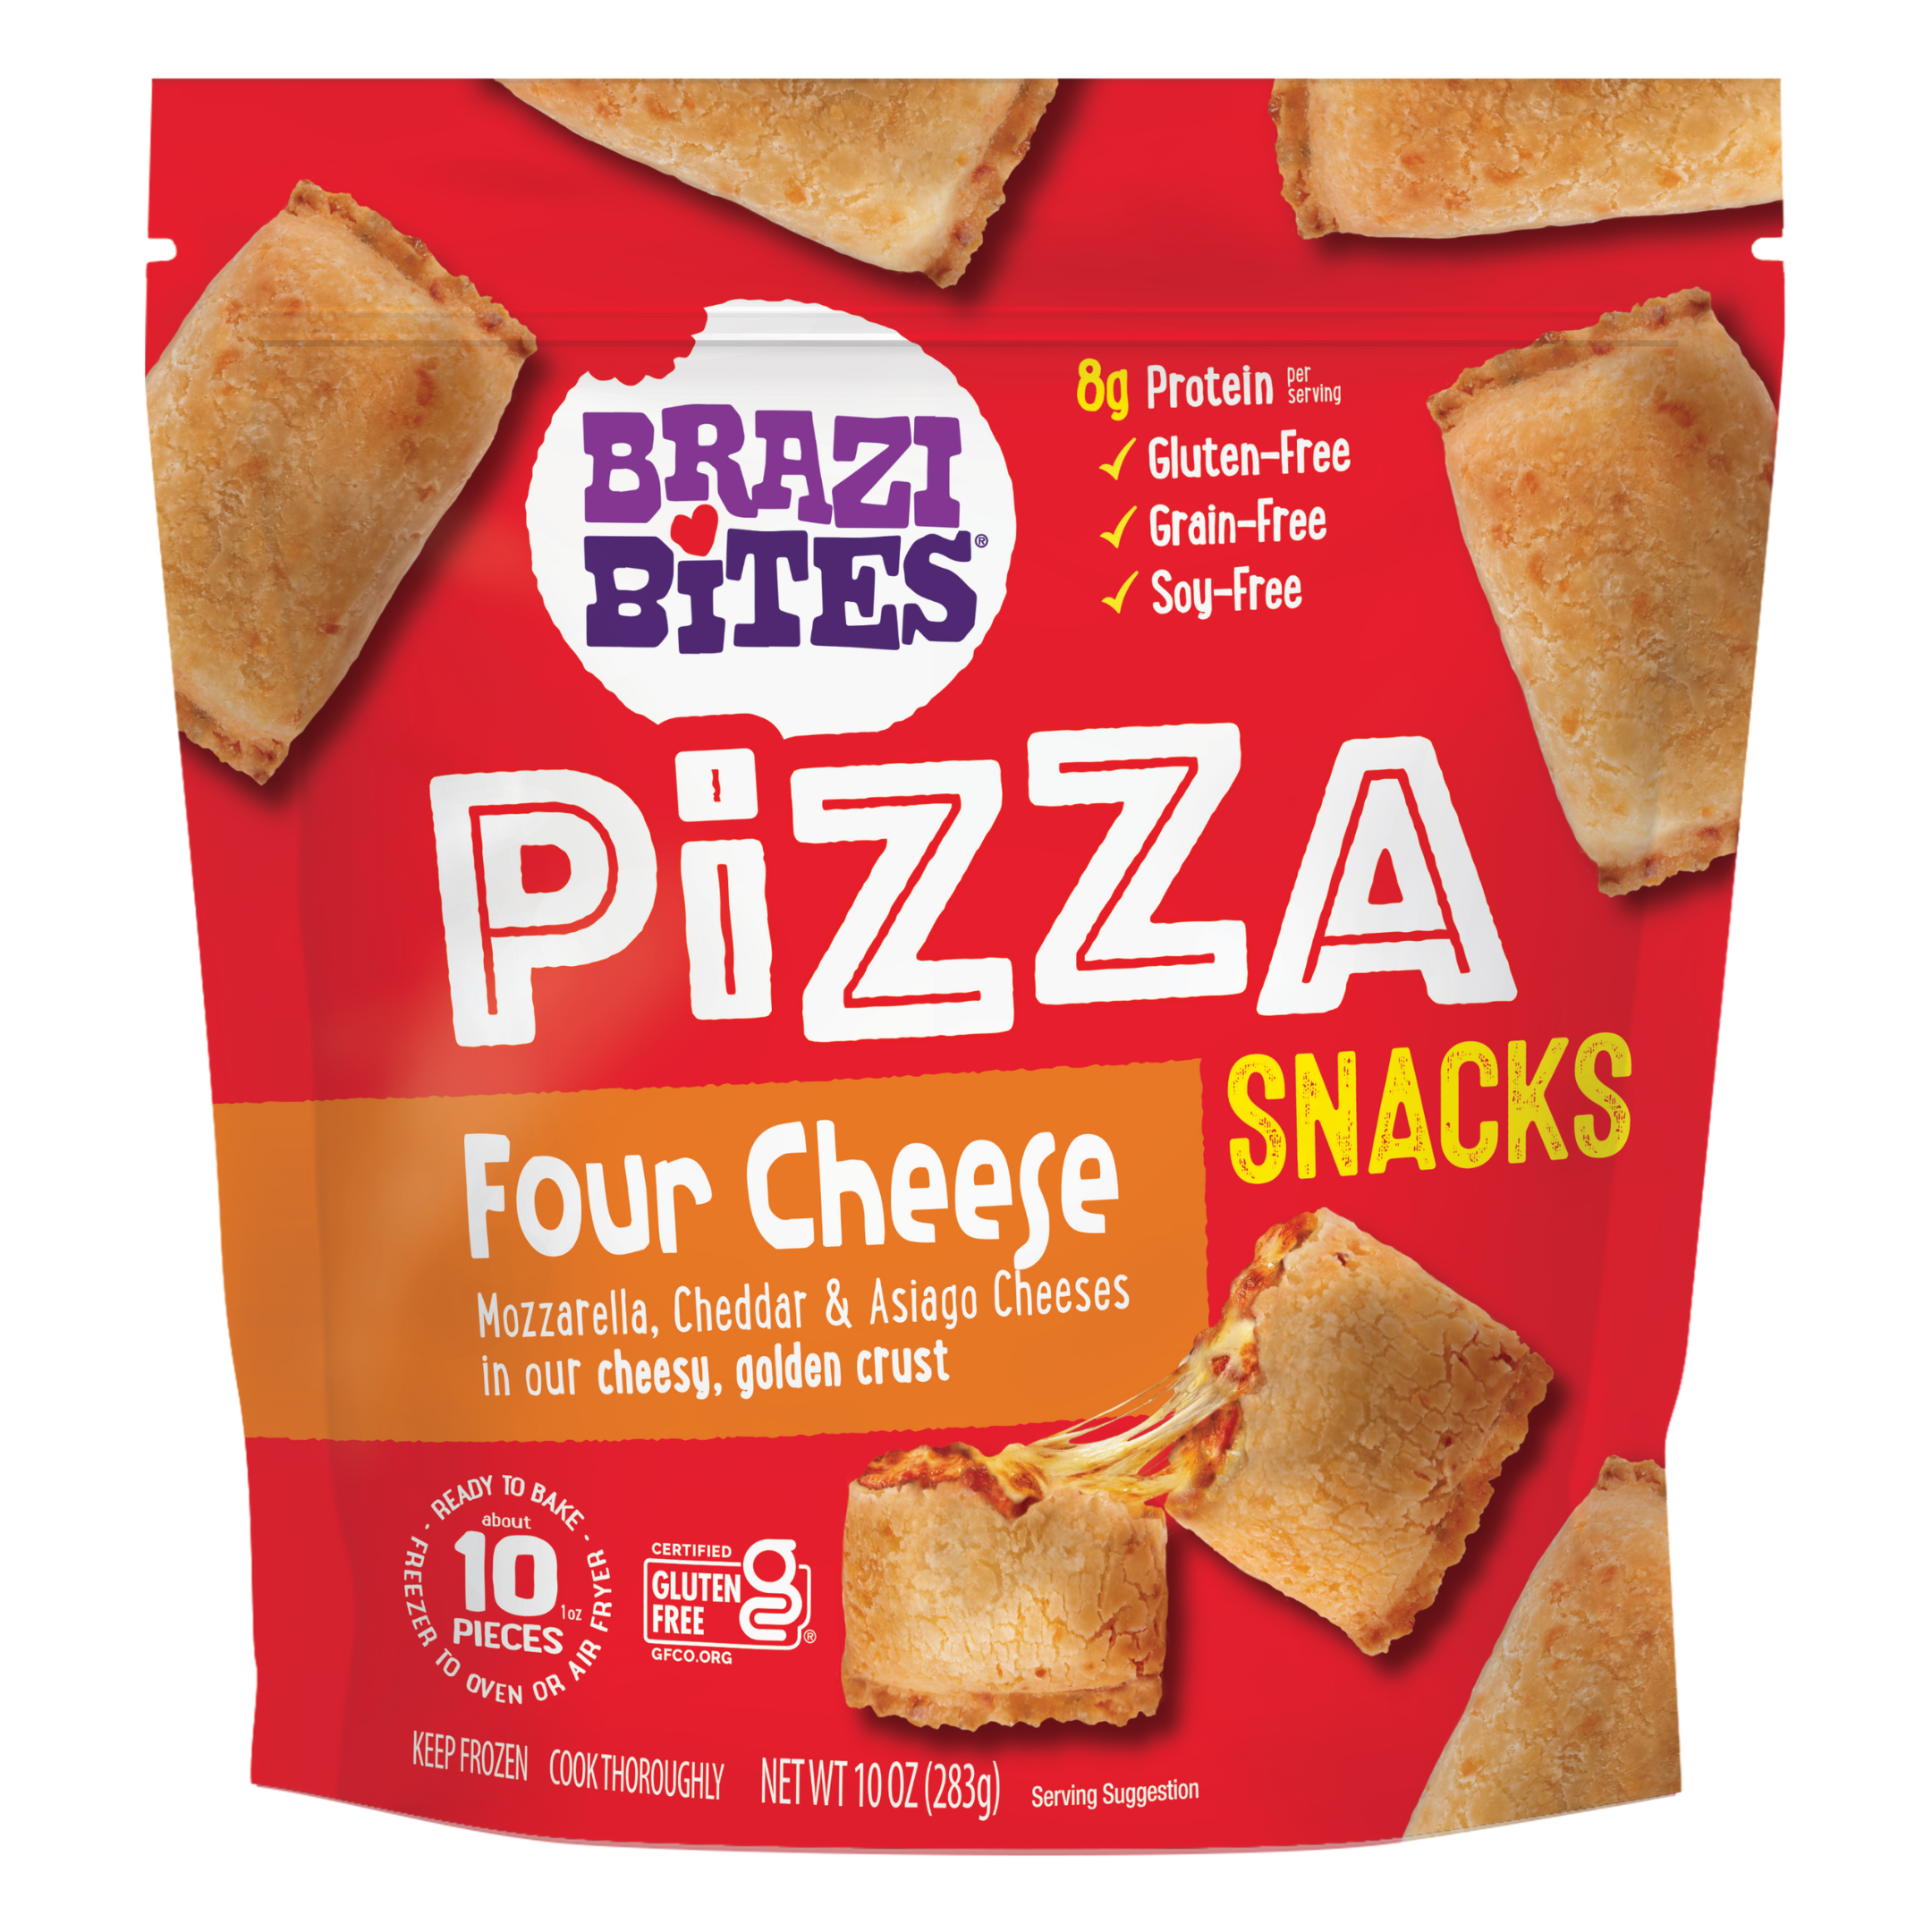 Four Cheese Pizza Snacks